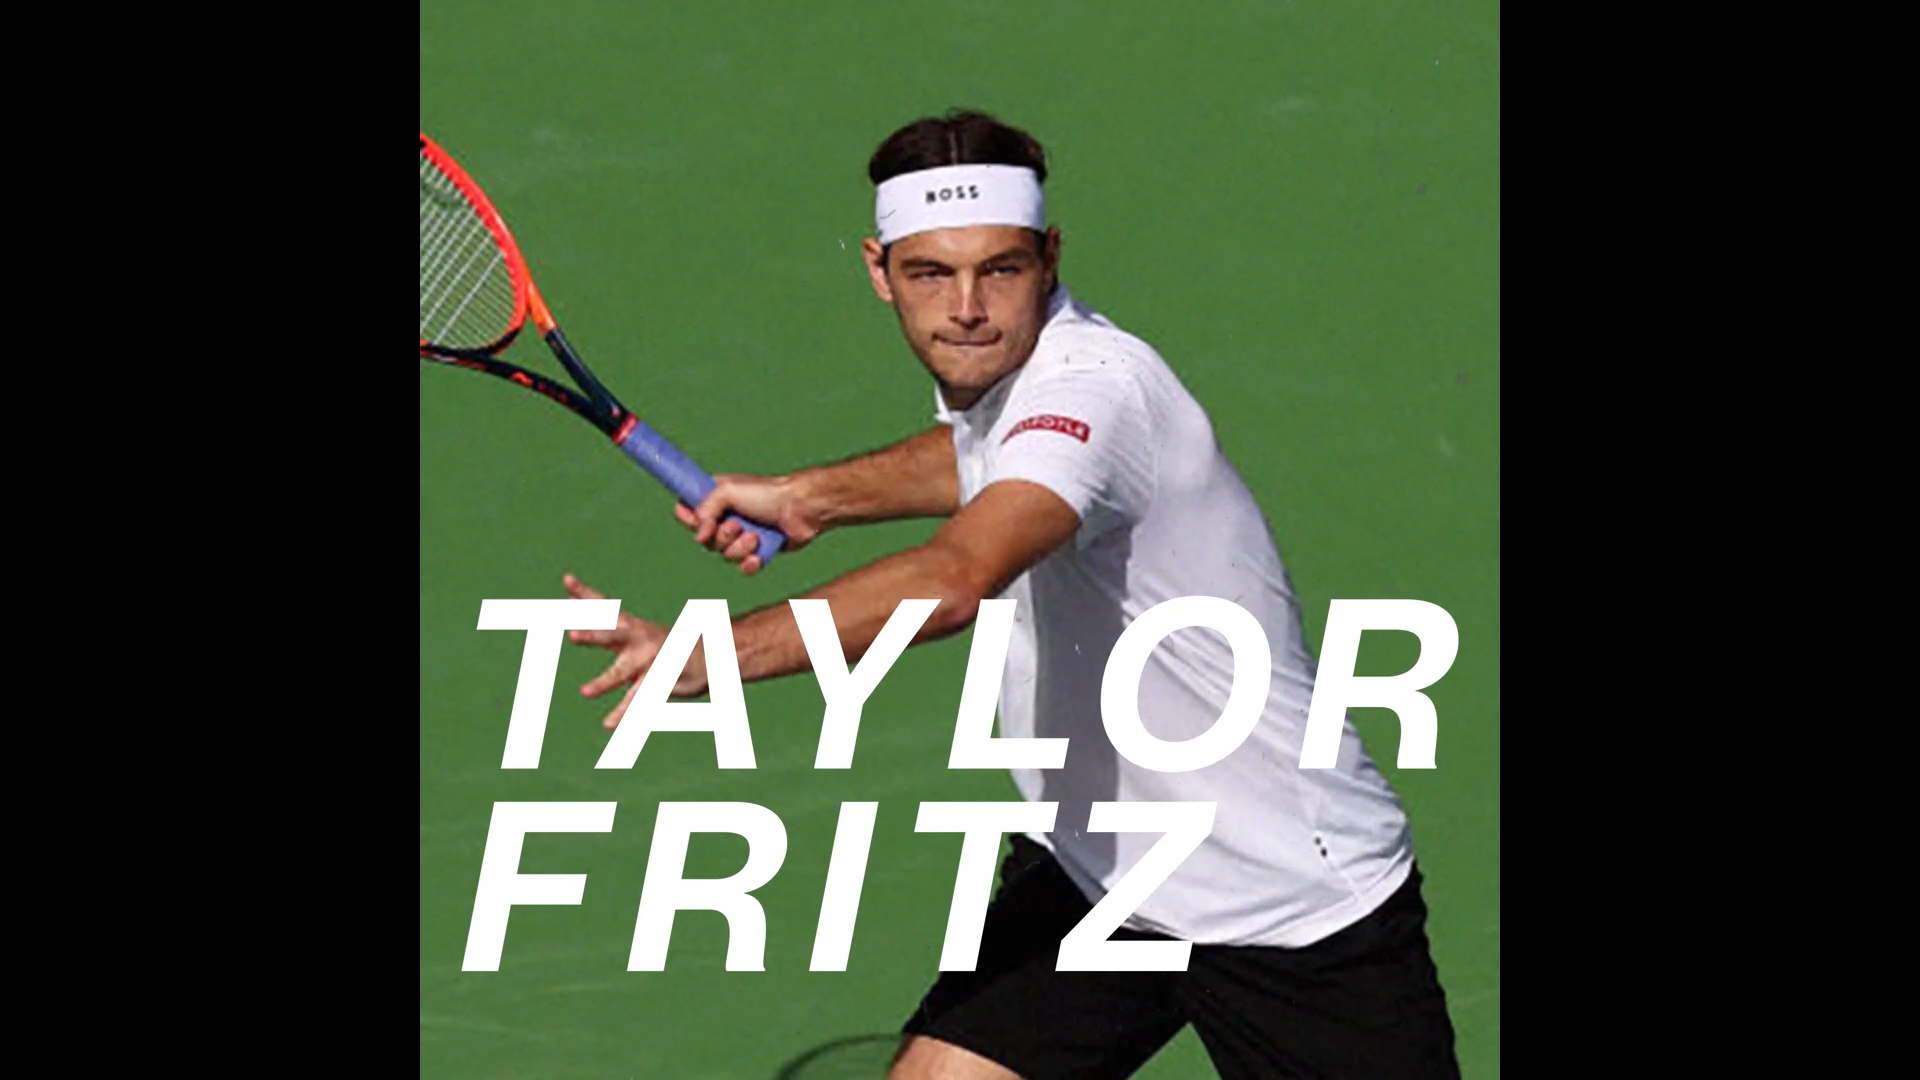 Eight Sleep names Taylor Fritz as athlete ambassador and investor to power the next generation of tennis legends.